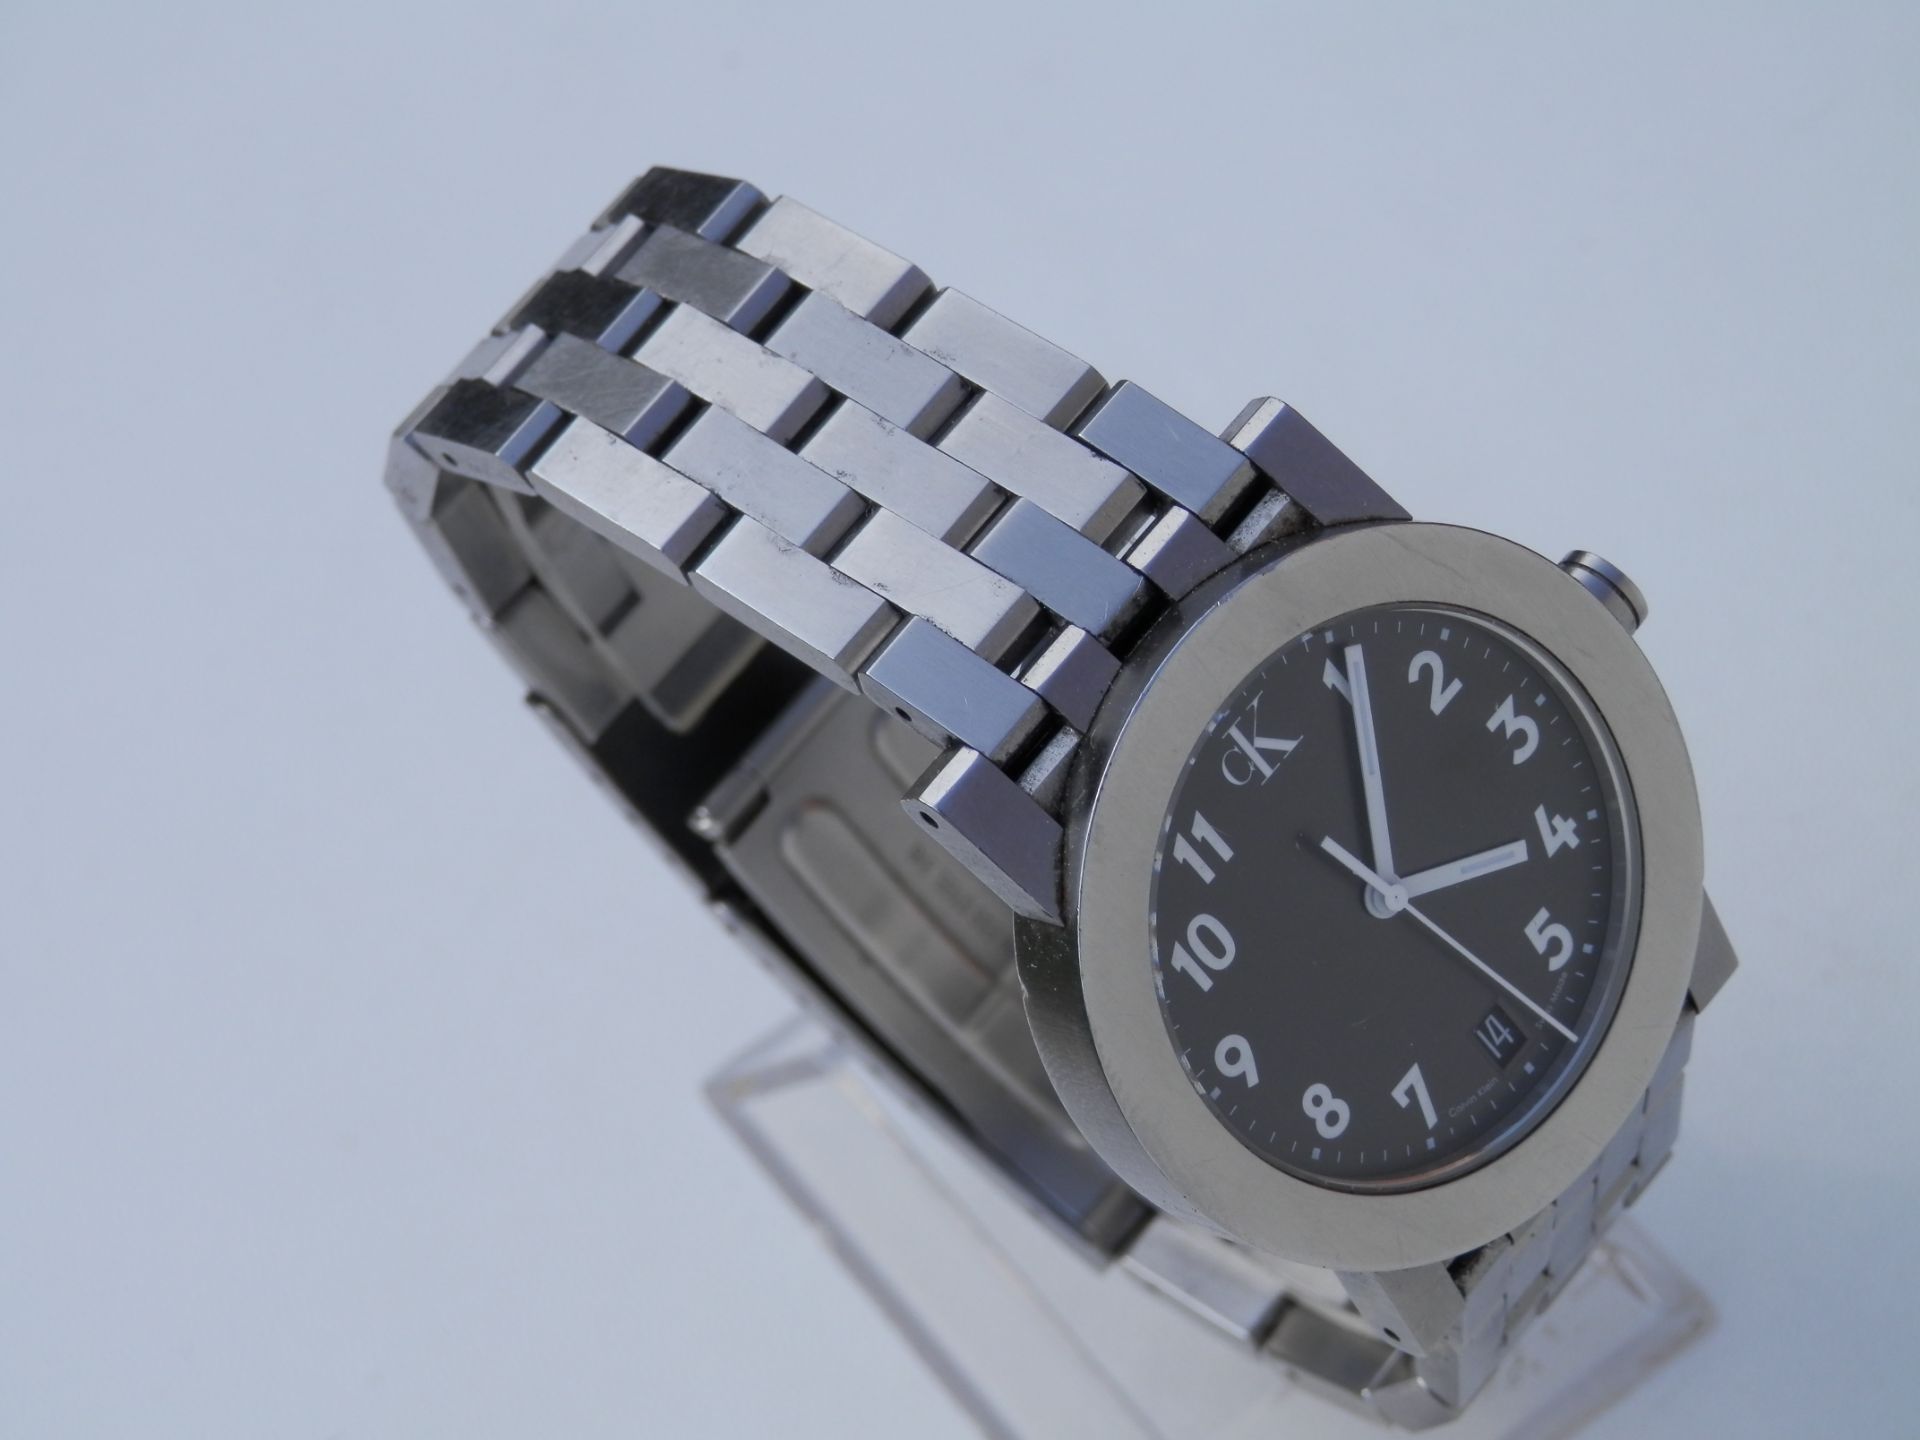 SUPERB SWISS GENTS 100% GENUINE CALVIN KLEIN K8111 FULL STAINLESS WATCH WITH MILITARY LOOK DIAL, - Image 5 of 12